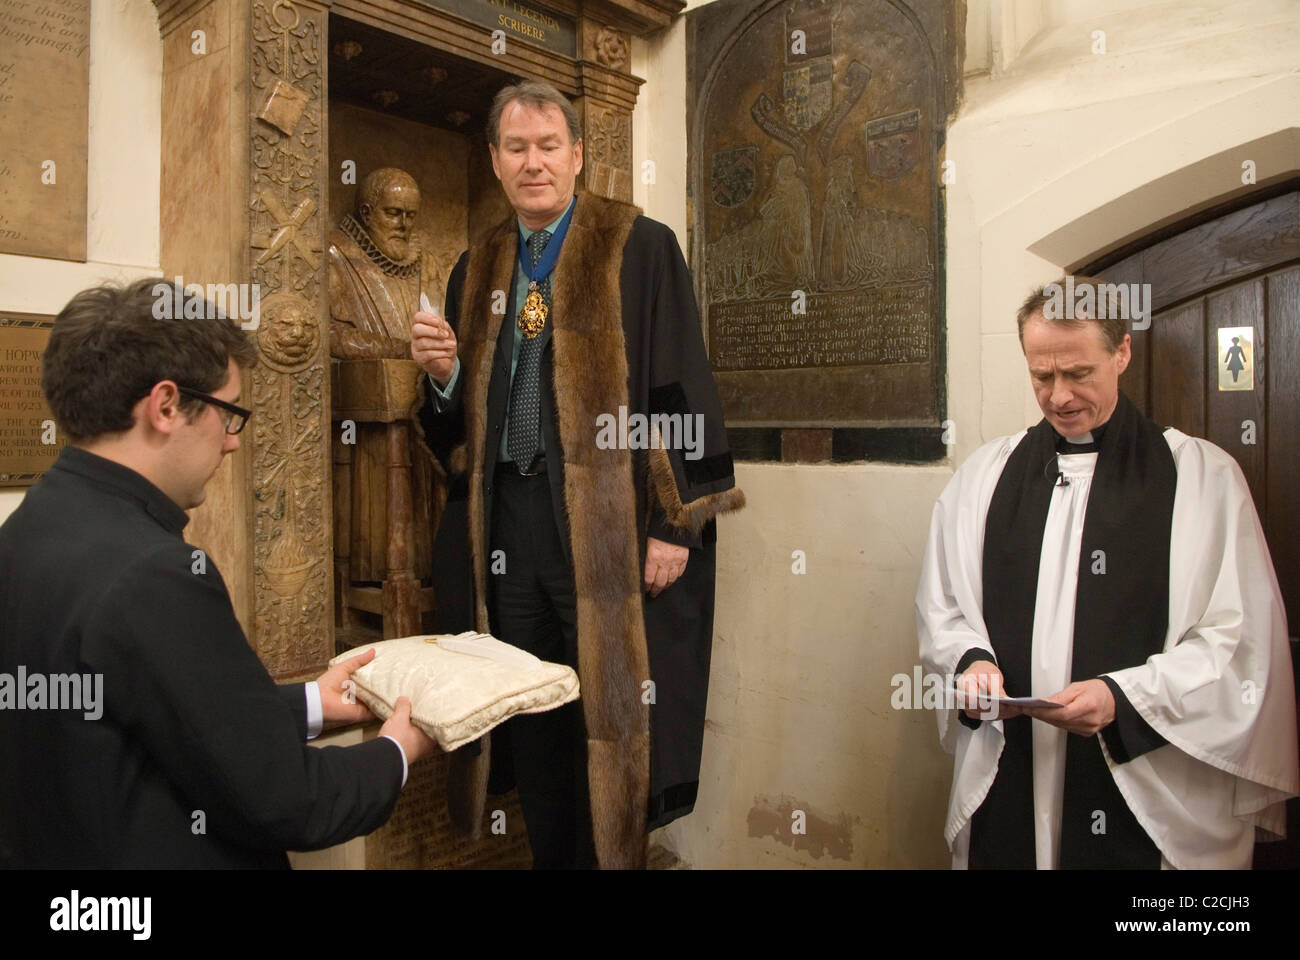 John Stow Changing the Quill Ceremony alla chiesa di St Andrew Undershaft City di Londra UK. 2010s 2011 OMERO SYKES Foto Stock